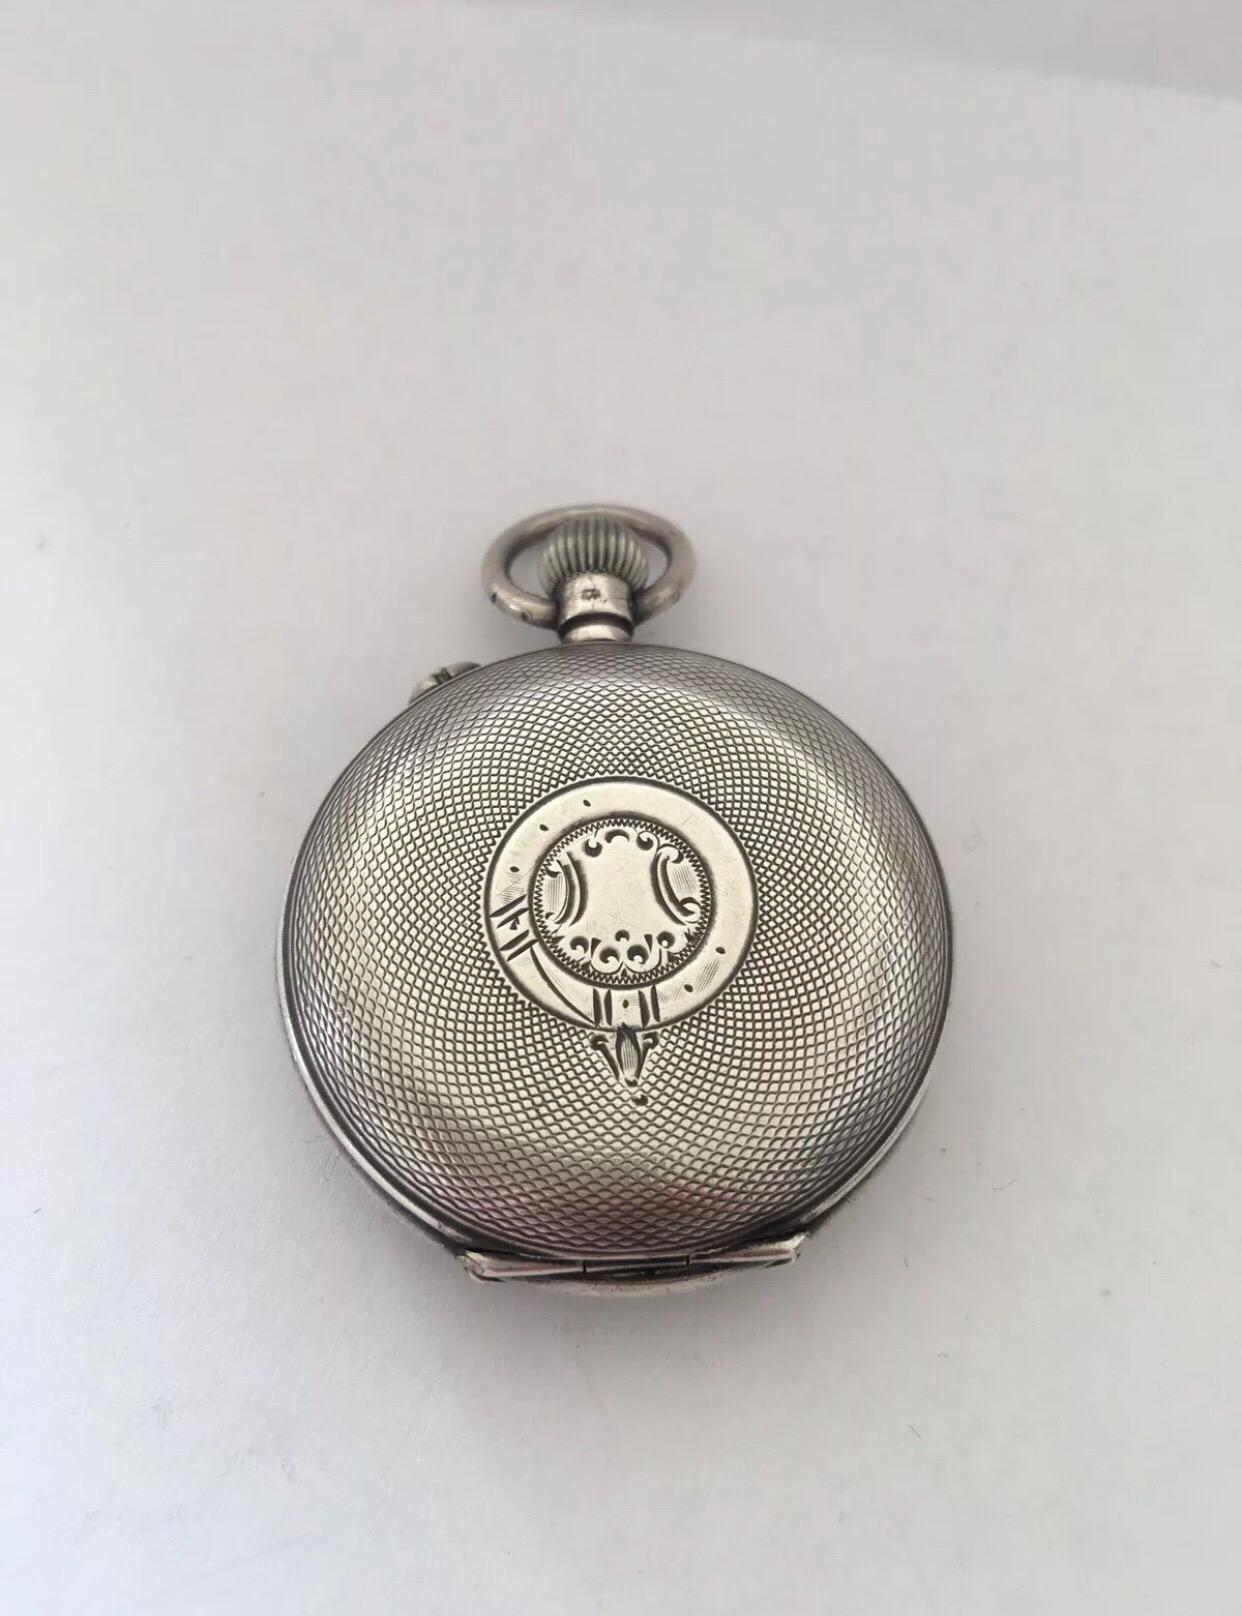 
Small Roskopf Swiss Made Full Hunter Silver Pocket Watch c.1880.


This beautiful and good quality watch is working and it is ticking well however, I cannot guarantee the time accuracy. Visible tiny dent on the back cover case as shown.

Please